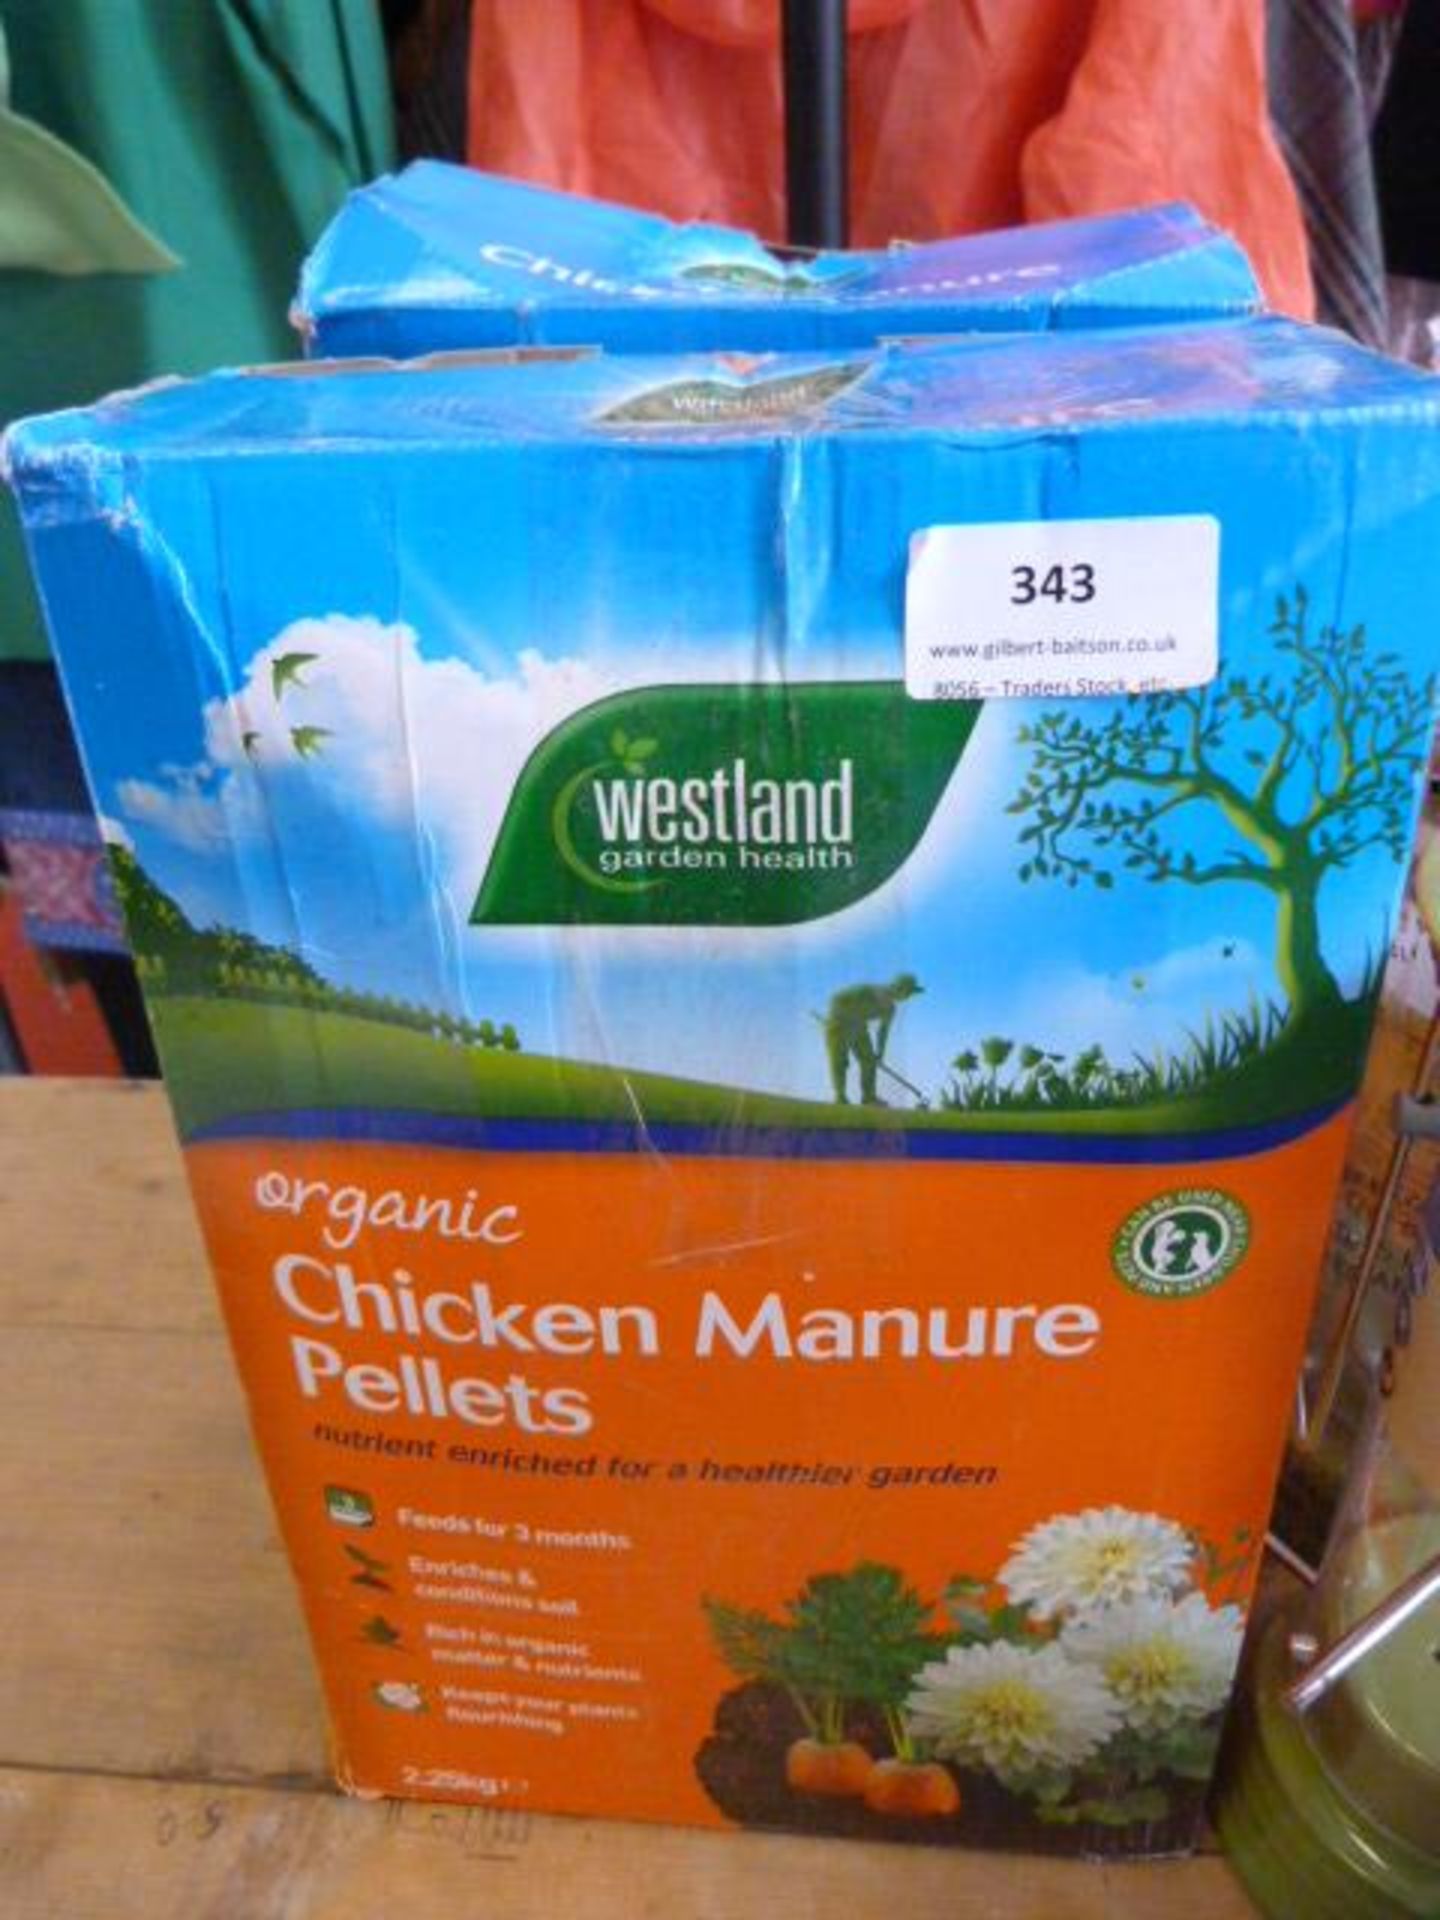 *Two 2.25kg Boxes of Chicken Manure Pellets